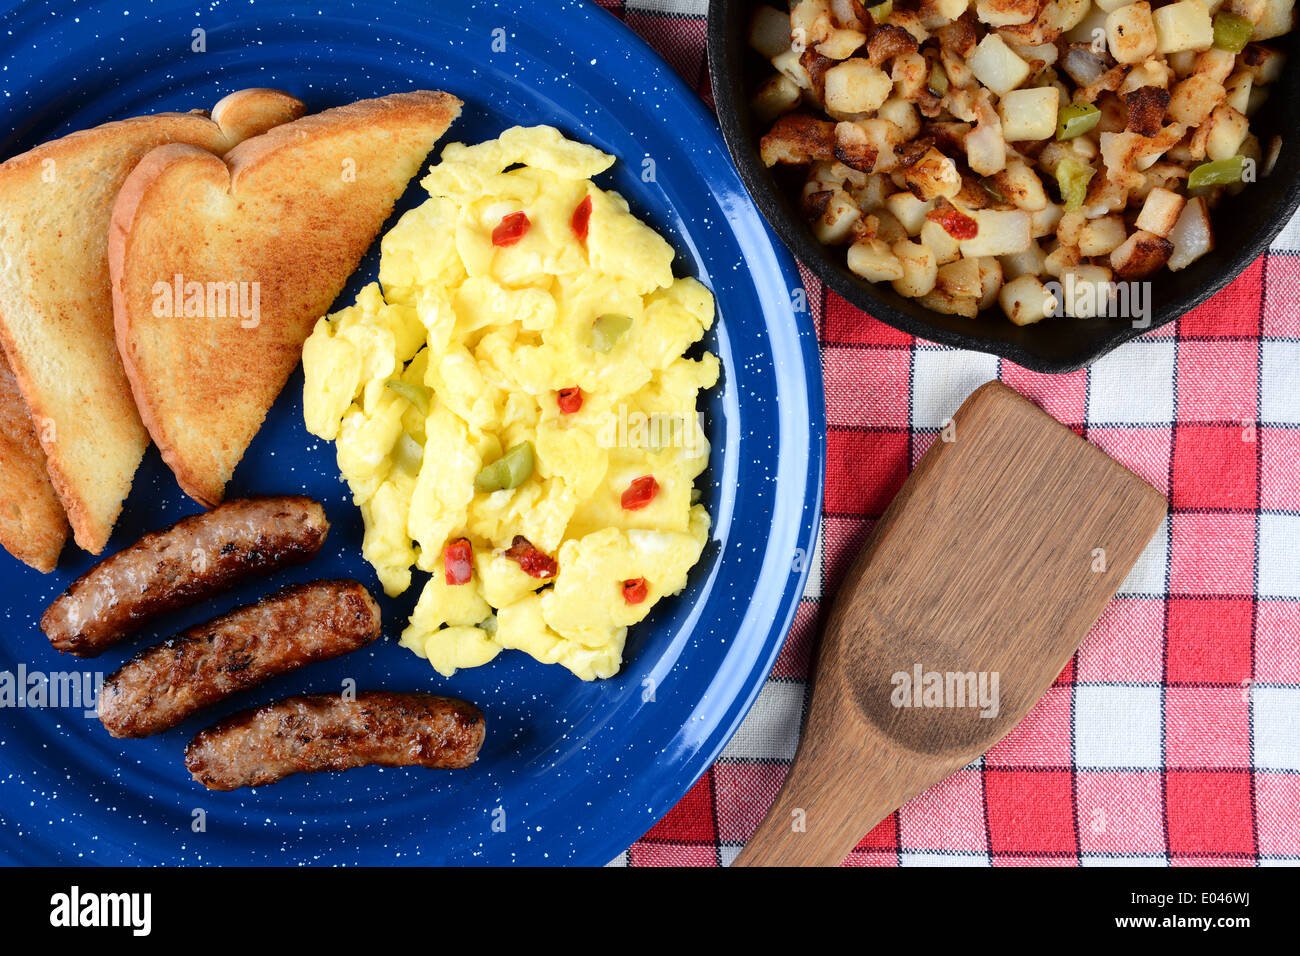 High angle shot of country style scrambled eggs with peppers, sausage and toast. The breakfast is on a rustic wooden table Stock Photo